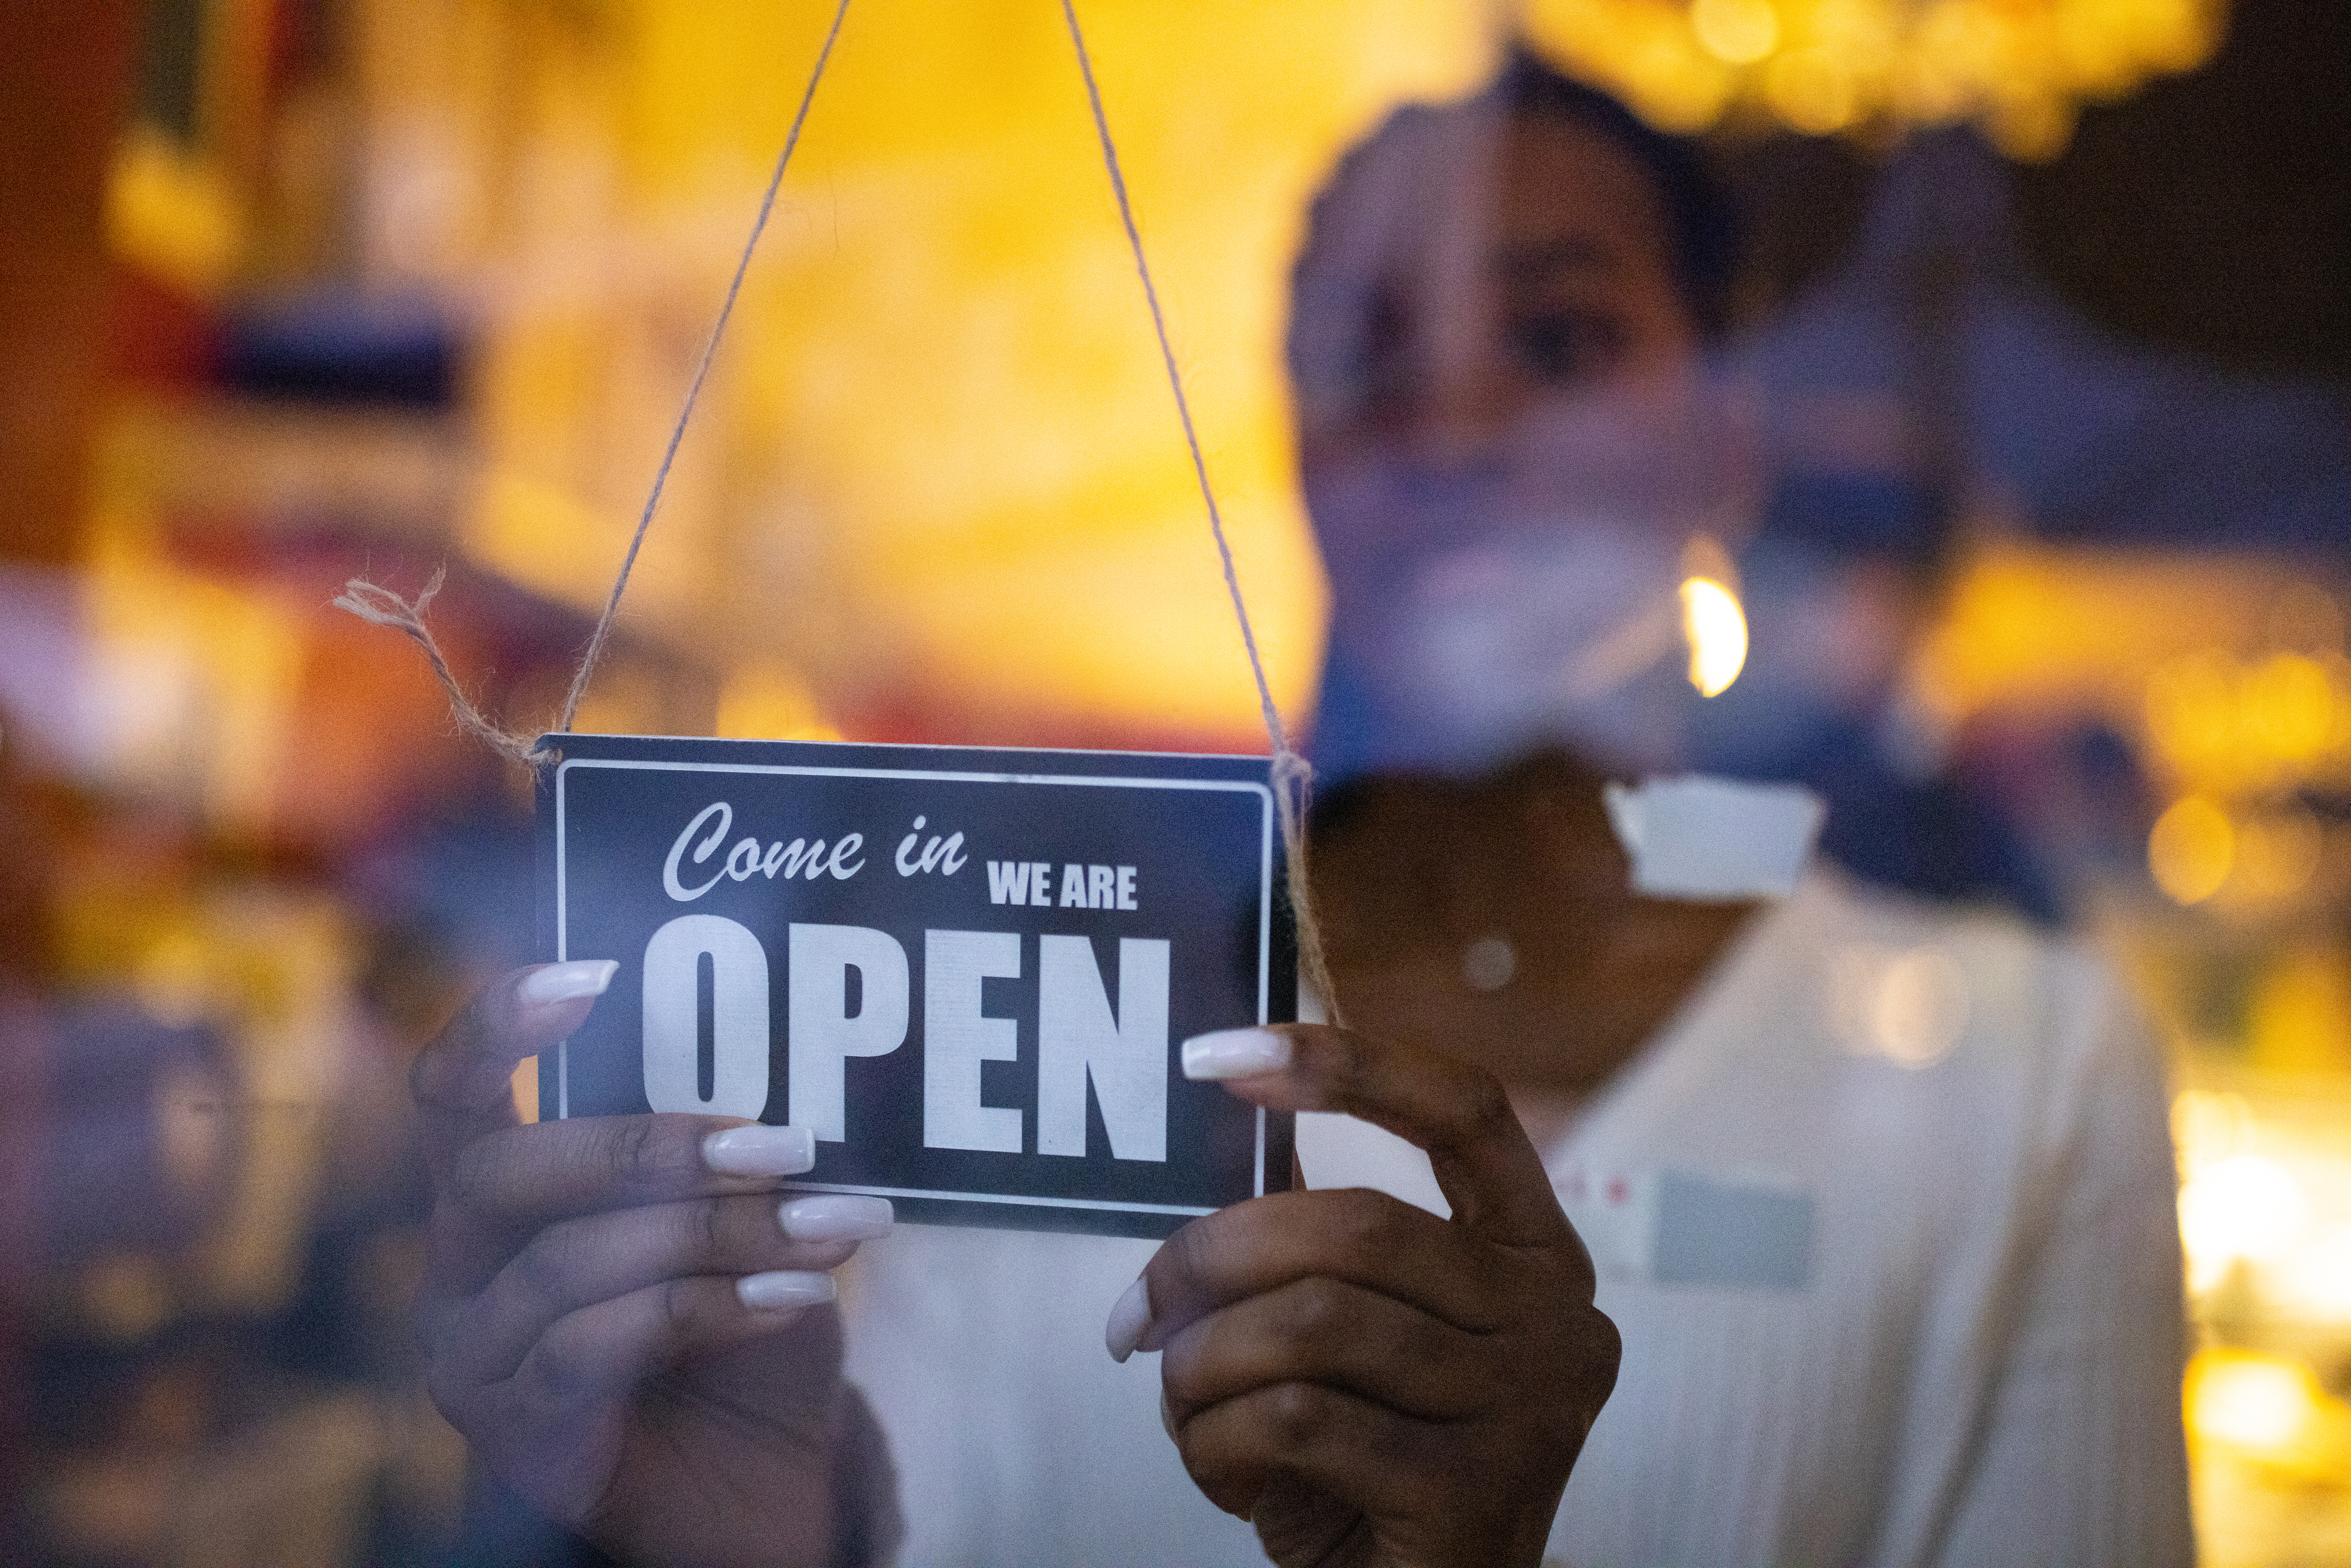 Business owner hanging an open sign at a cafe